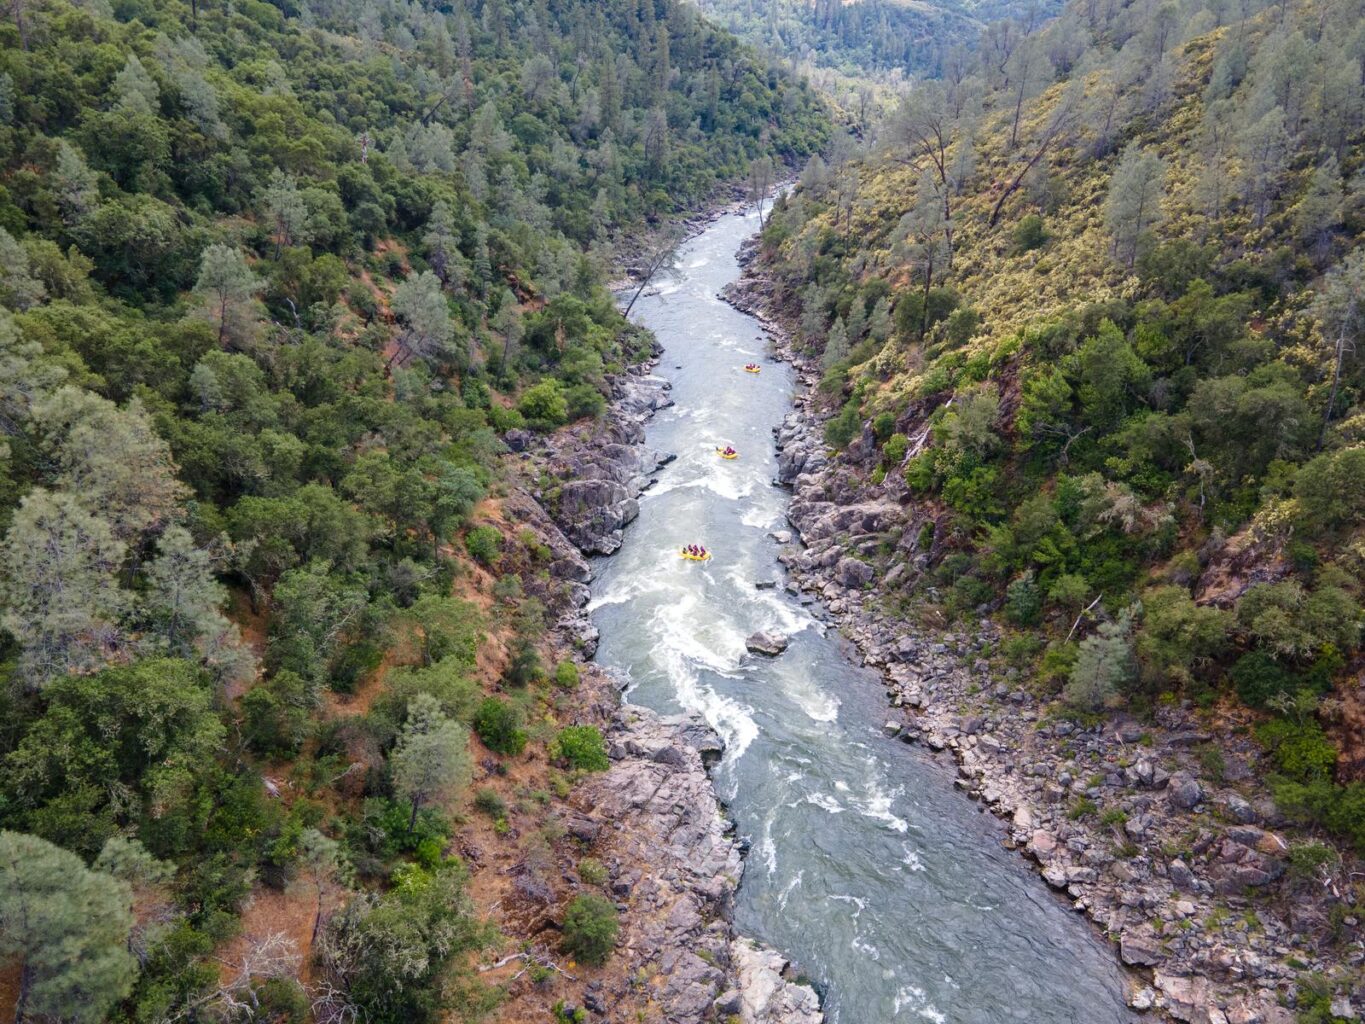 An ariel shot of 3 yellow rafts as they make their way down the South Fork American, surrdounded by hills of green trees and rock.